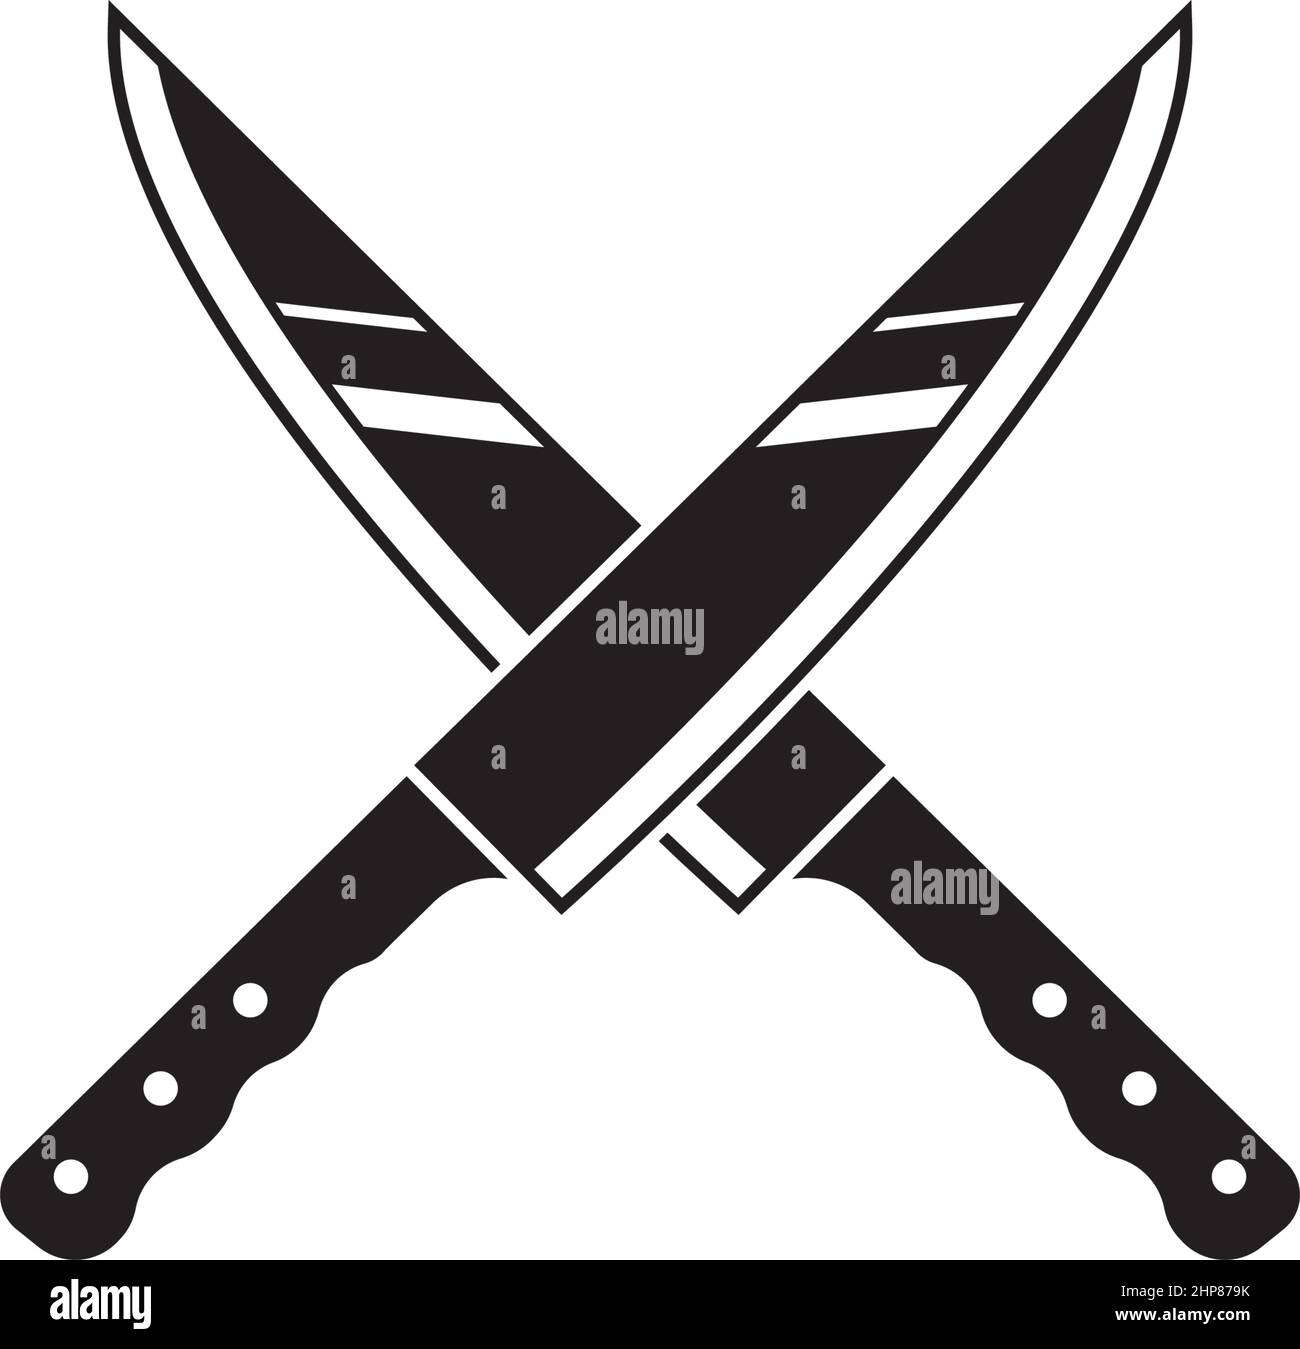 crossed kitchen knife or blade vector icon illustration design template Stock Vector